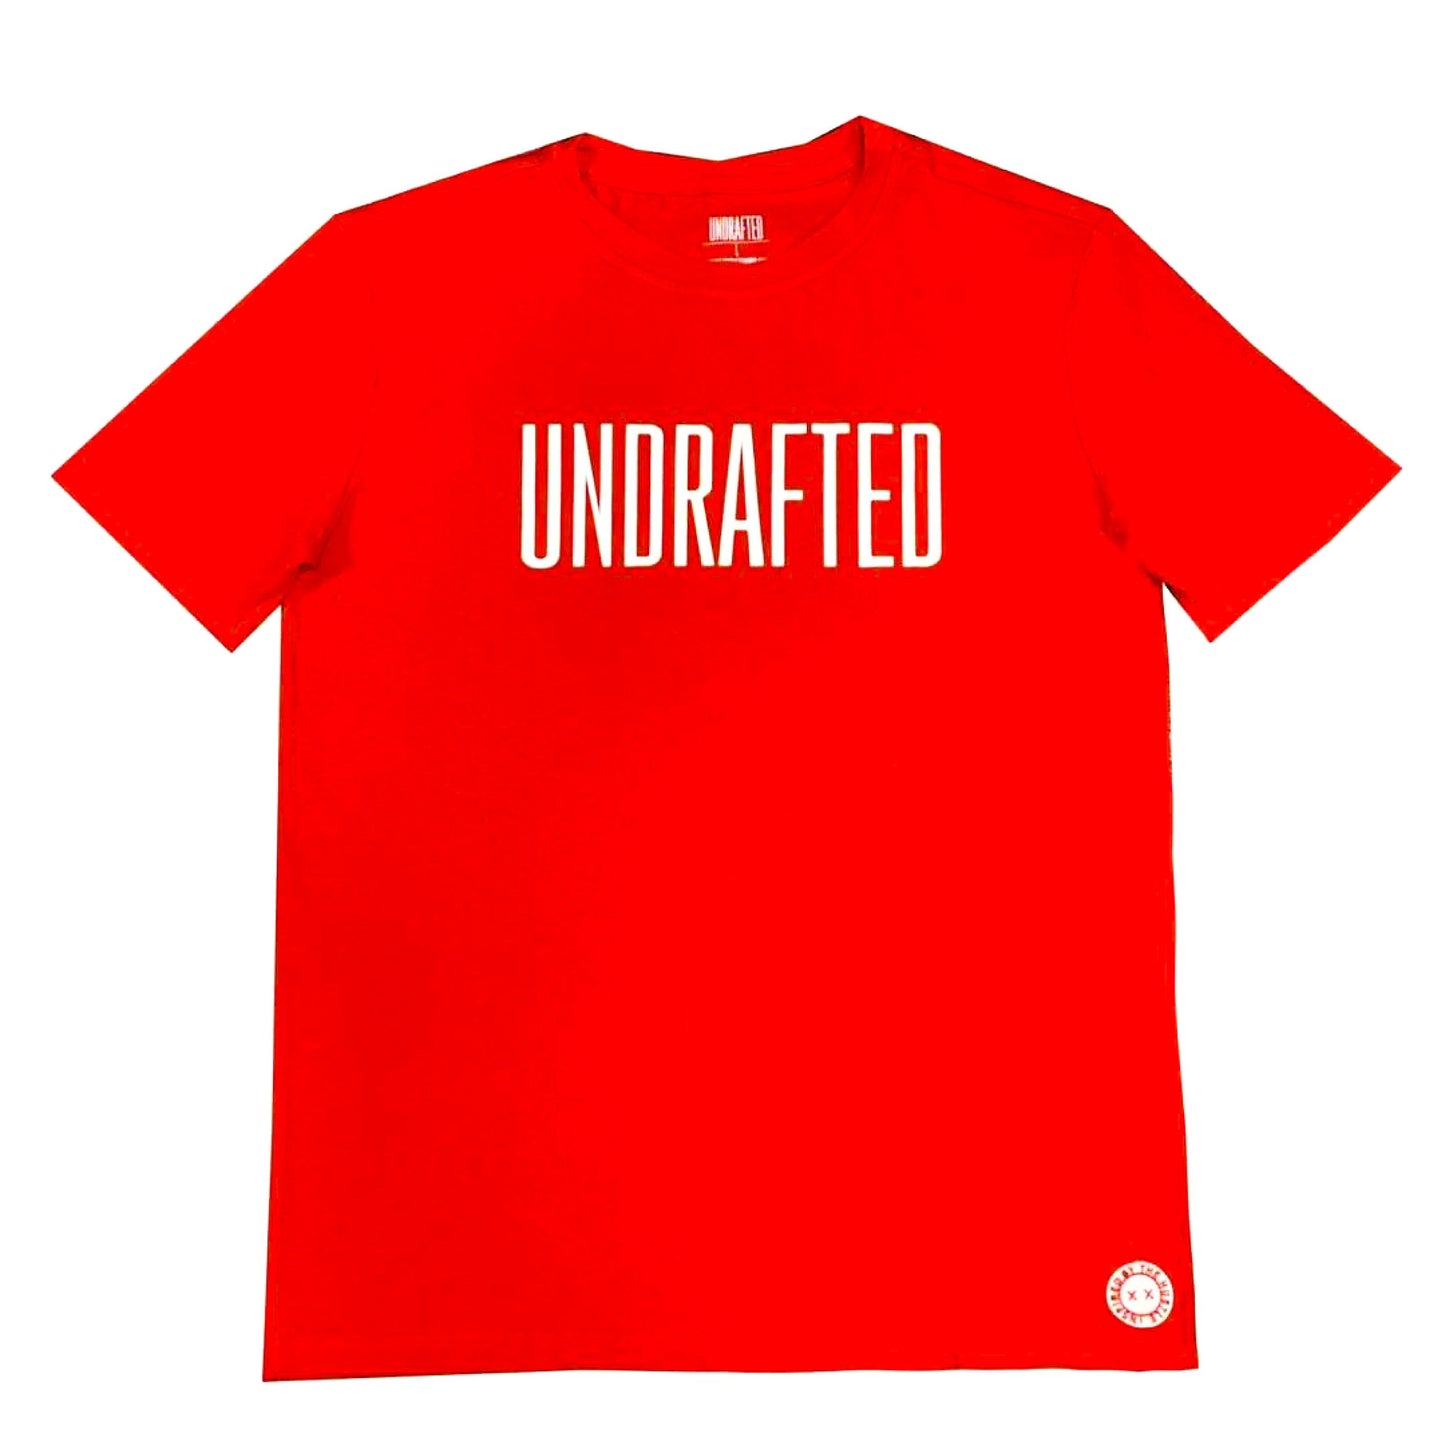 Undrafted T-Shirt Red/White*